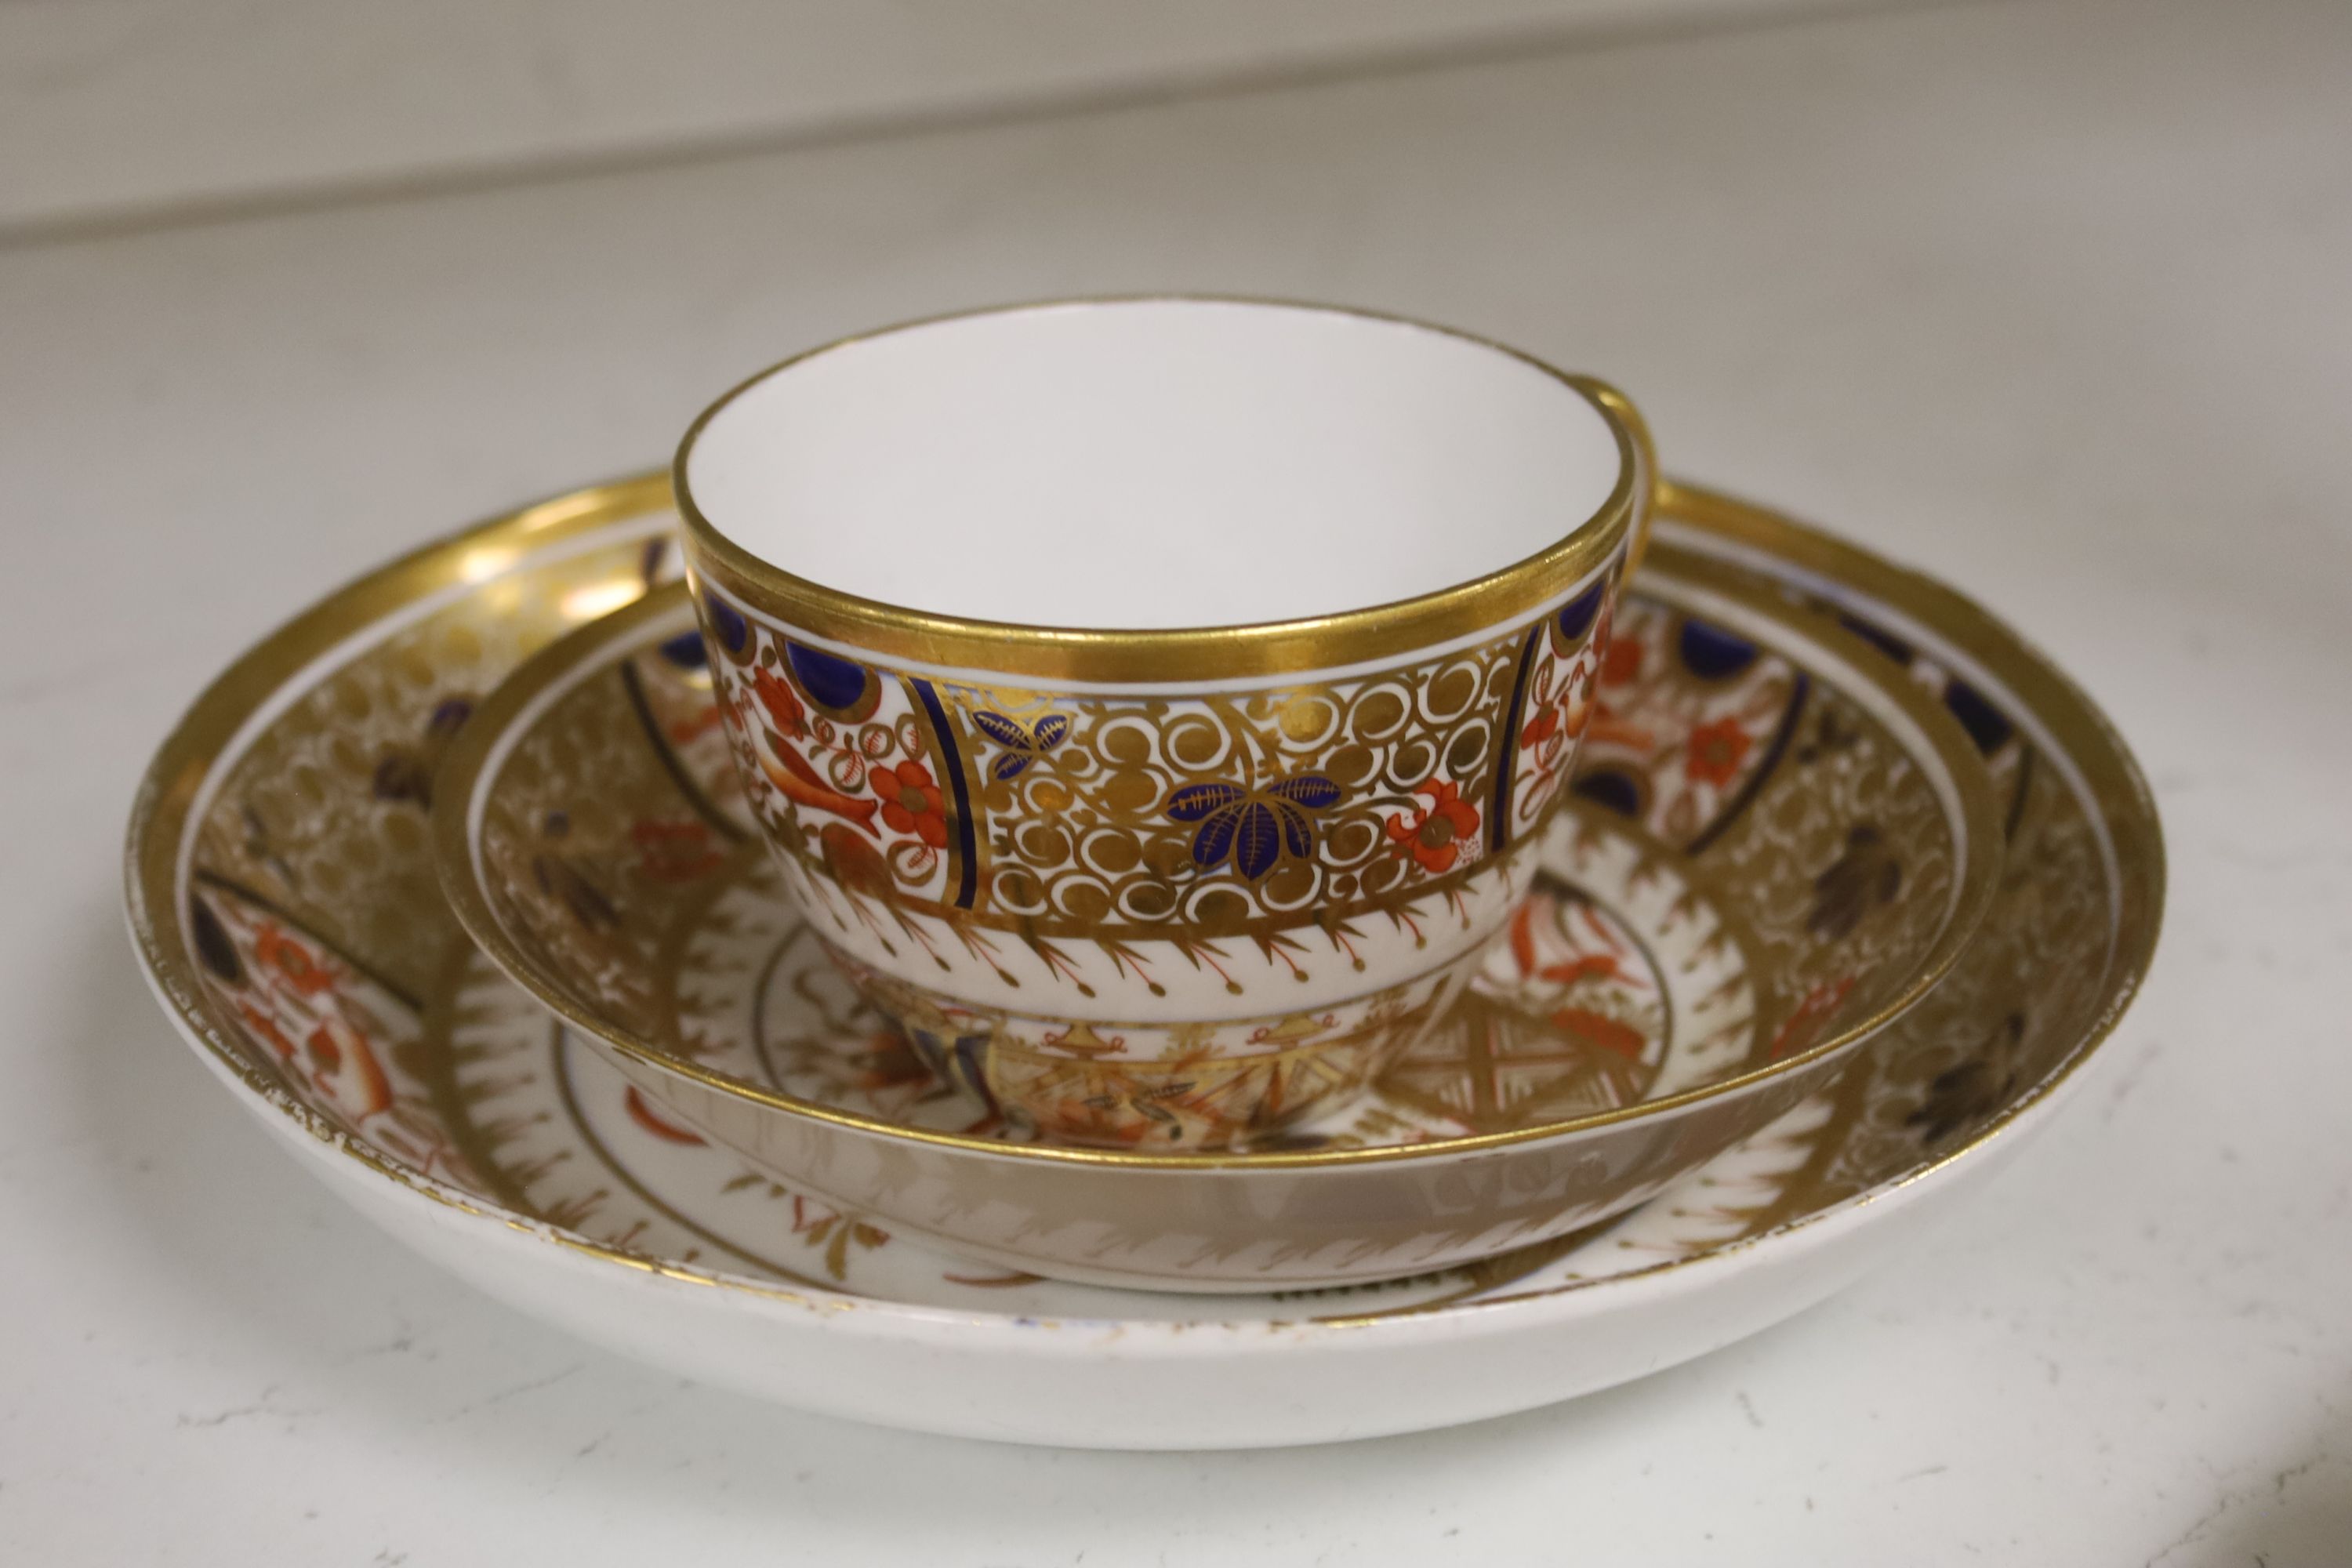 A set of six Spode teacups and saucers and a saucer dish painted with Imari pattern, amrked SPODE 1495